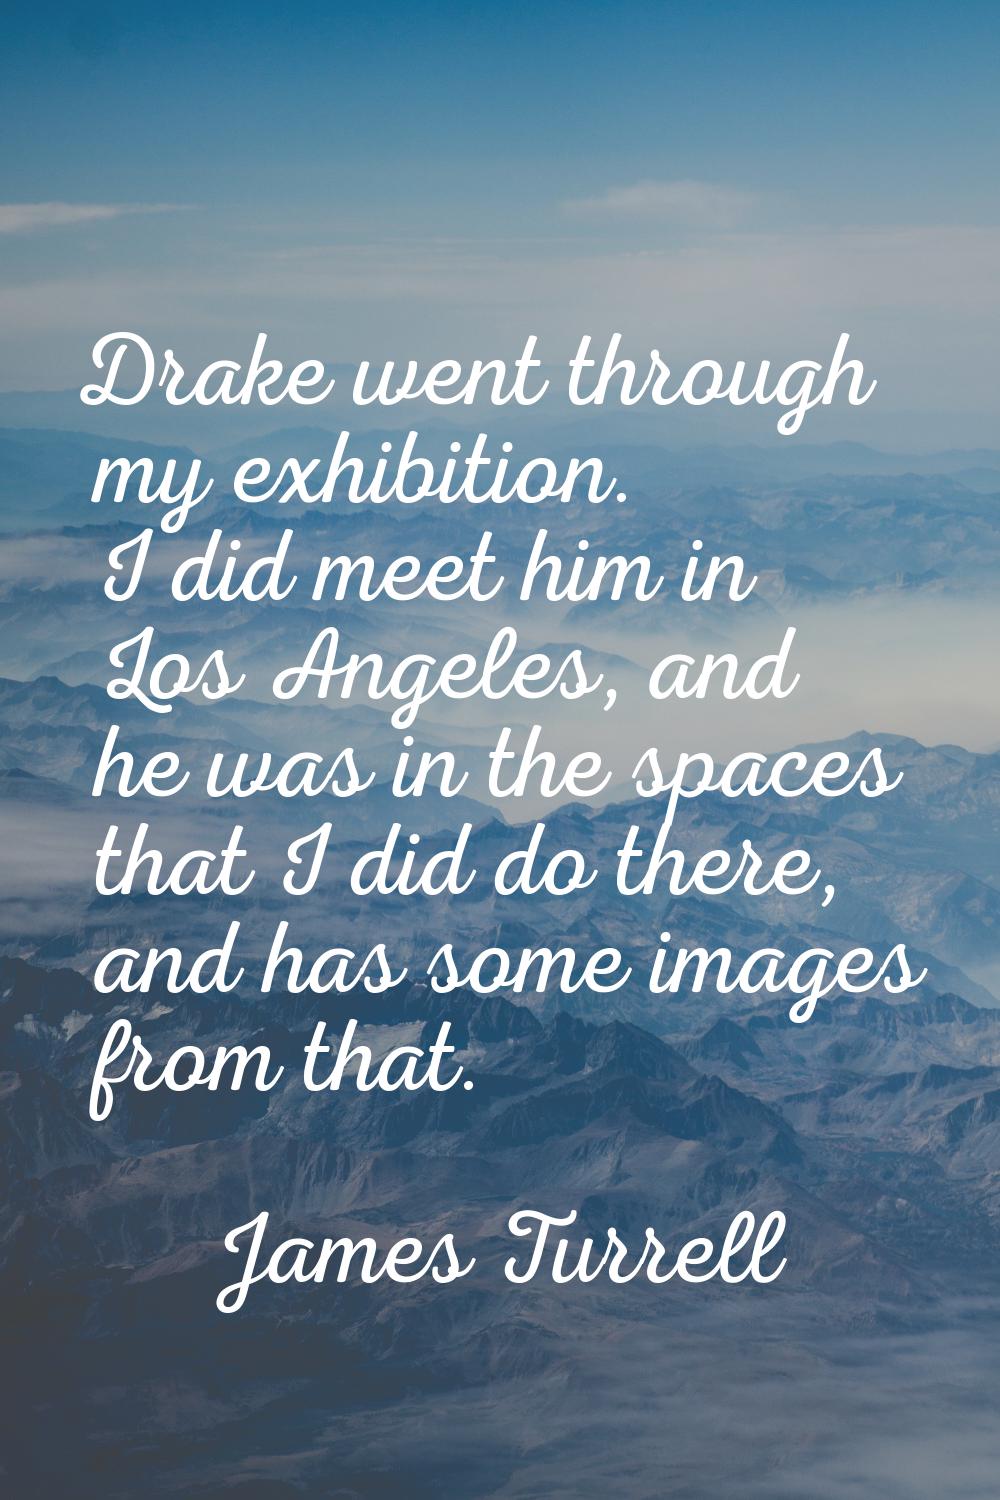 Drake went through my exhibition. I did meet him in Los Angeles, and he was in the spaces that I di